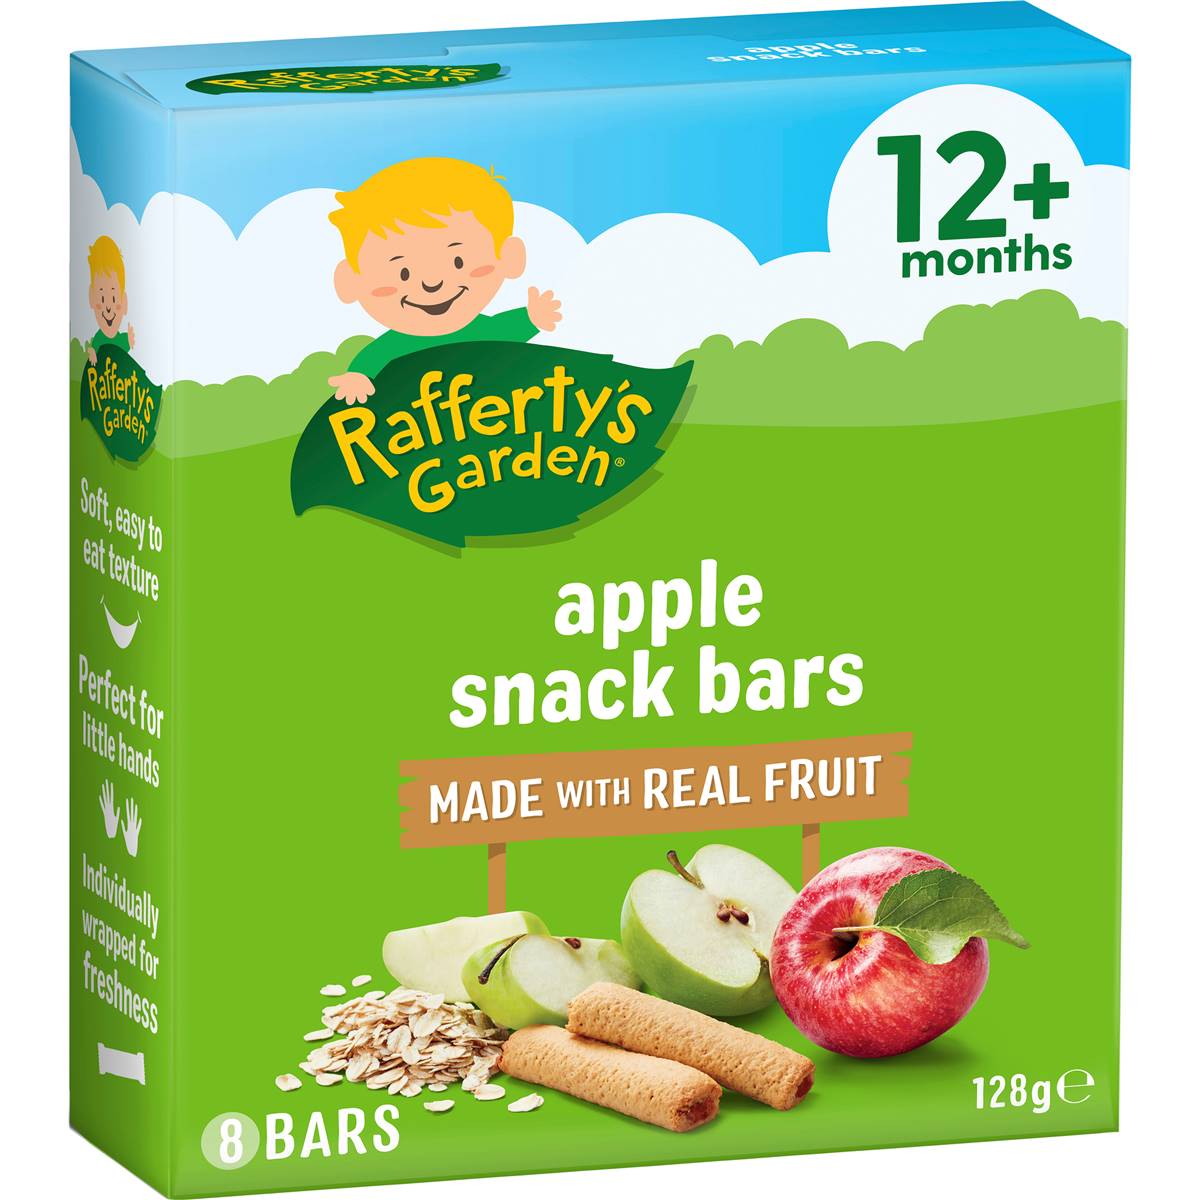 Calories in Rafferty's Garden Baby Food Apple Snack Bars Real Fruit 8 Pack 12+ Months